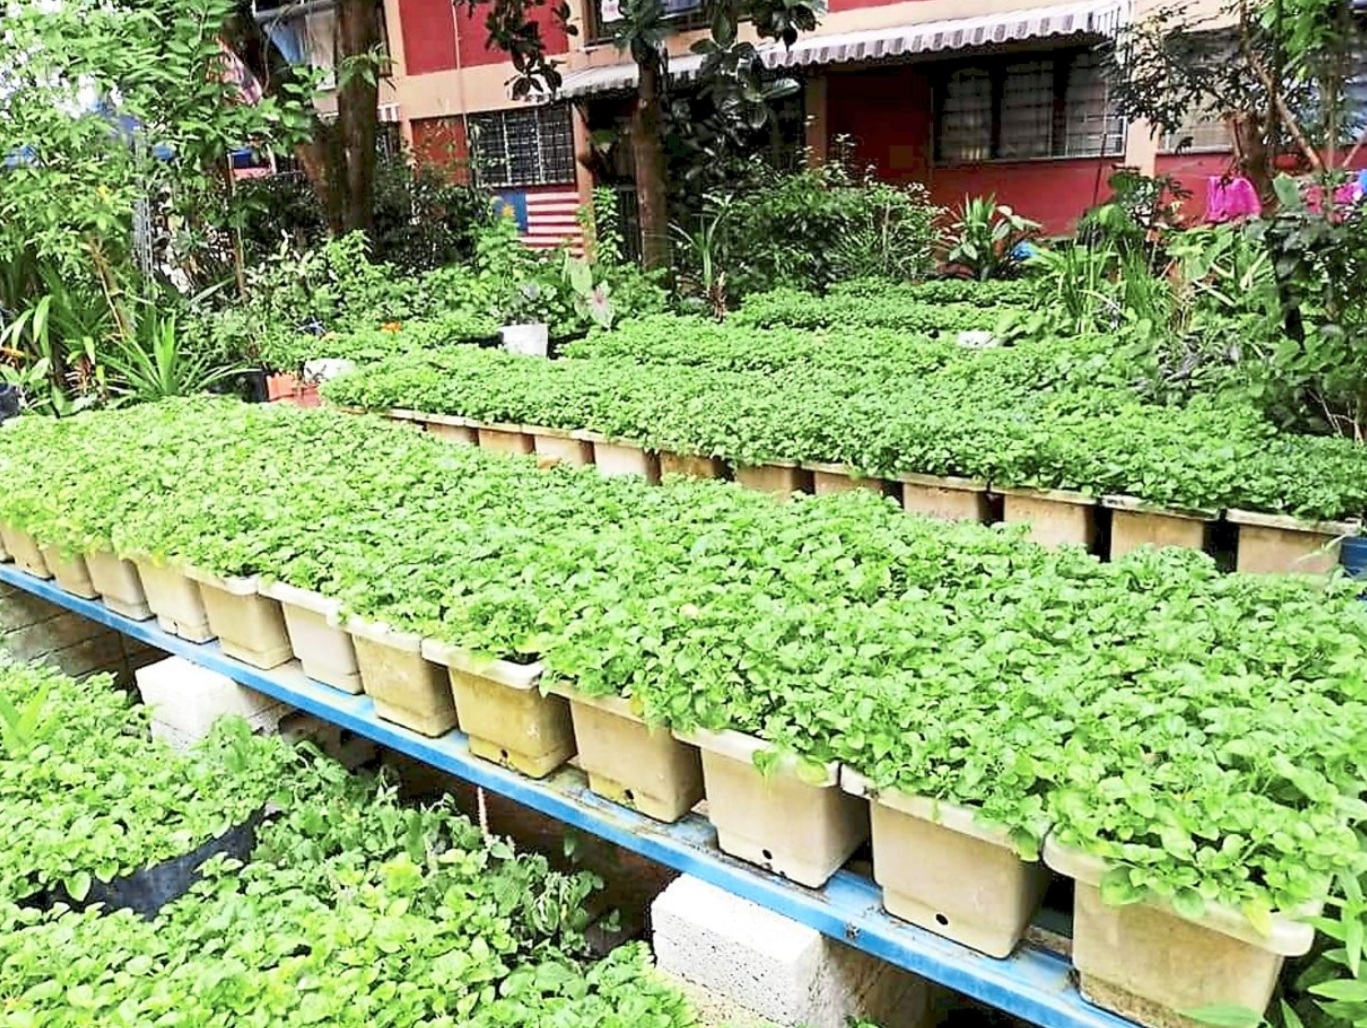 Groups welcome timely urban farming guideline